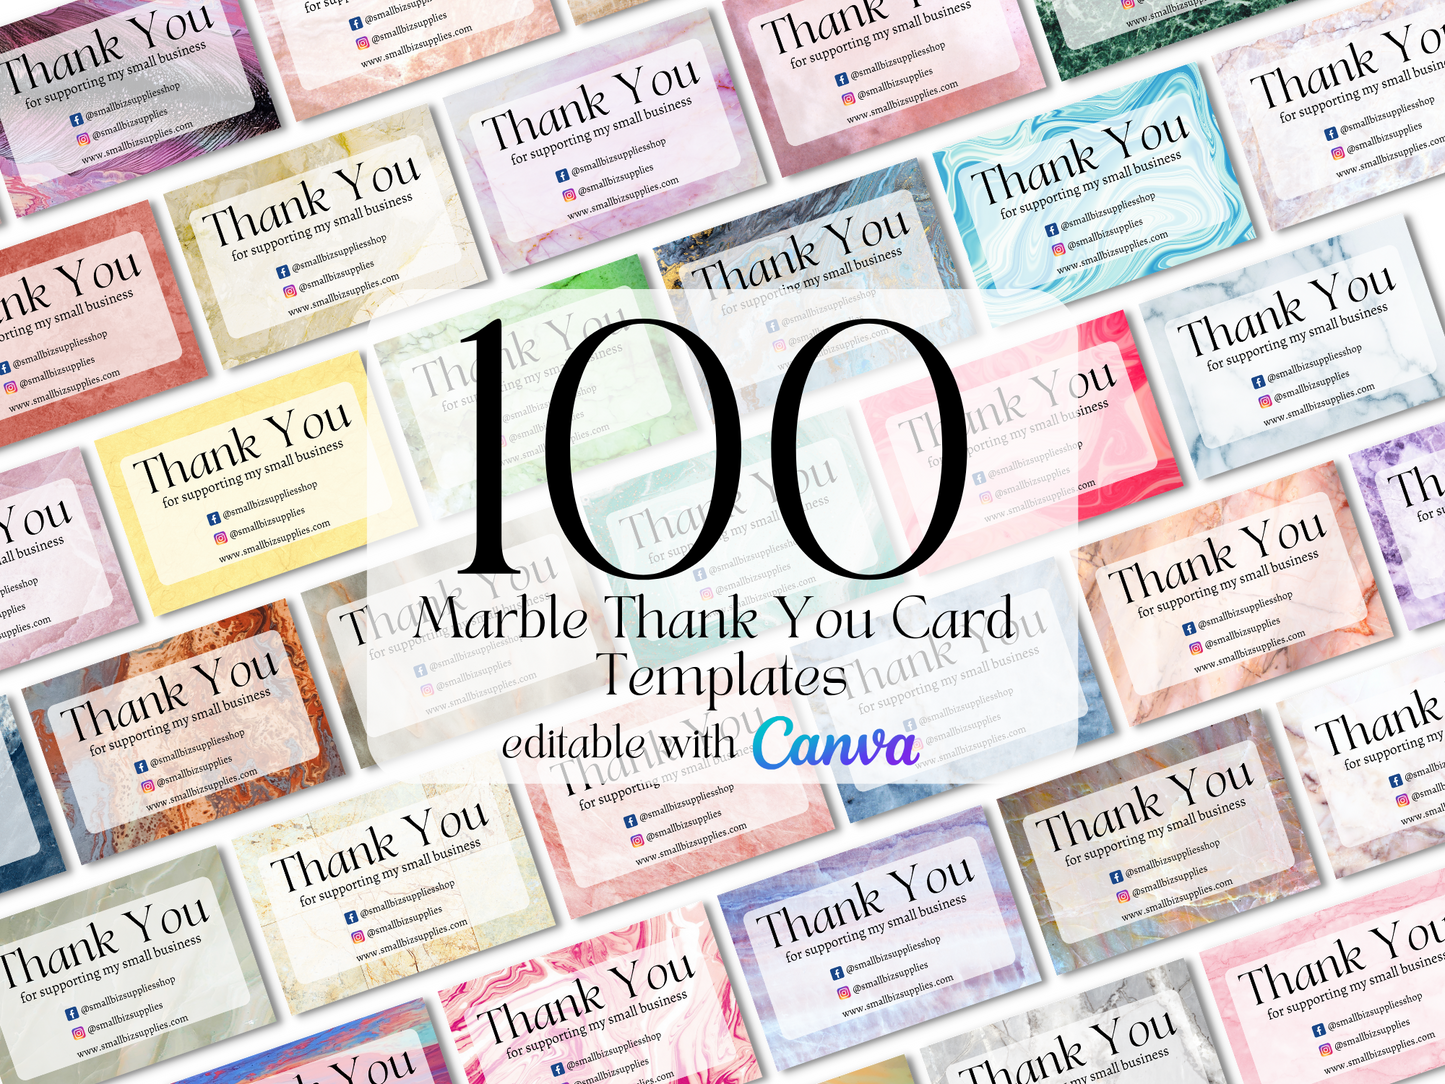 100x Marble Thank You Card Templates - Digital Download - Editable With Canva